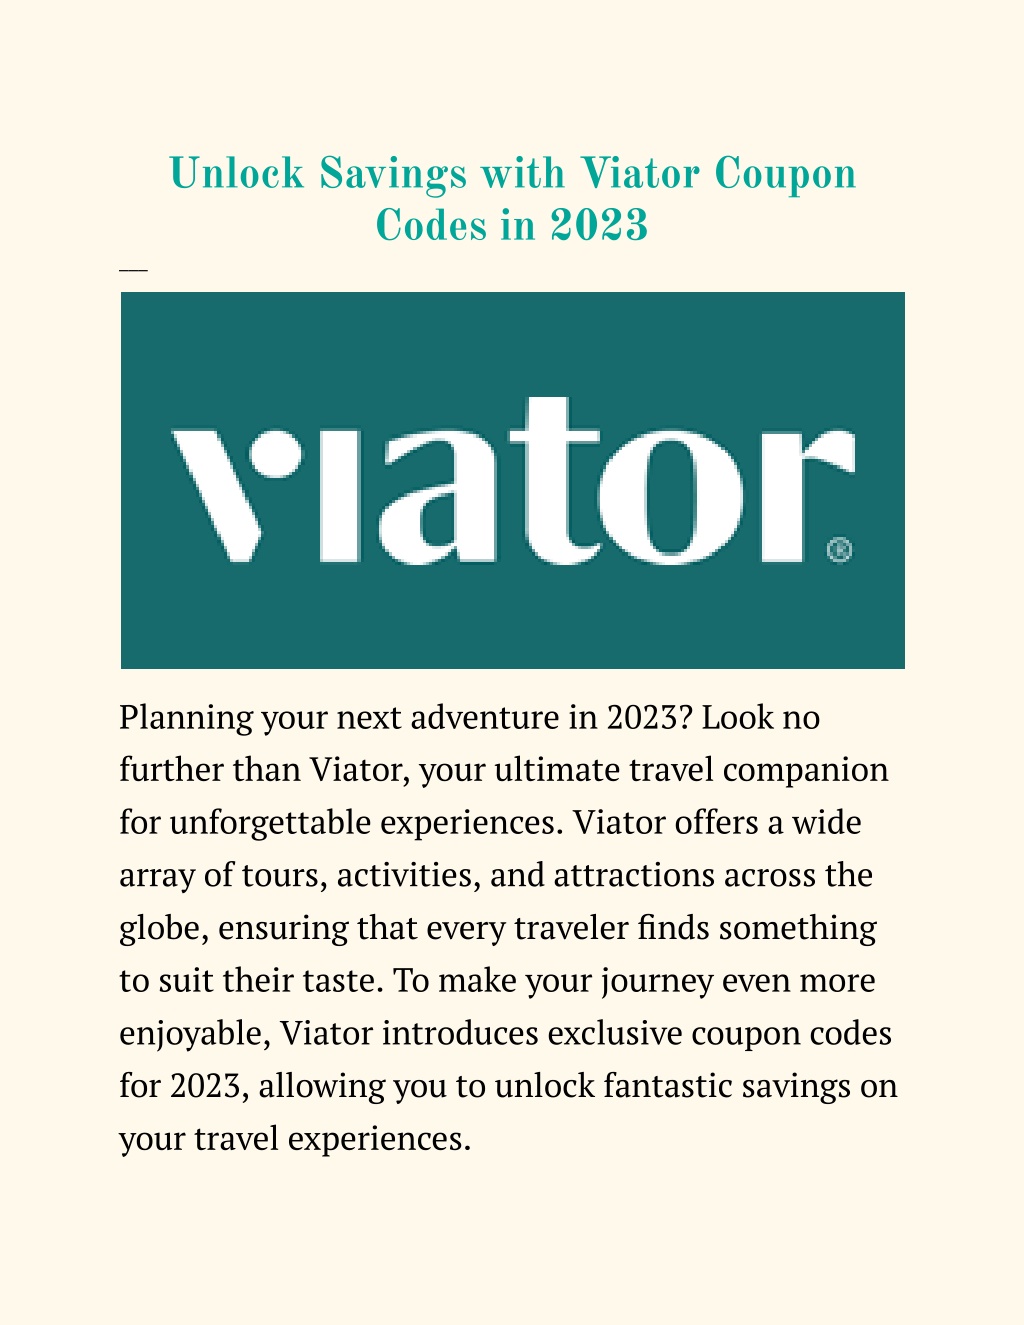 PPT Unlock Savings with Viator Coupon Codes in 2023 PowerPoint